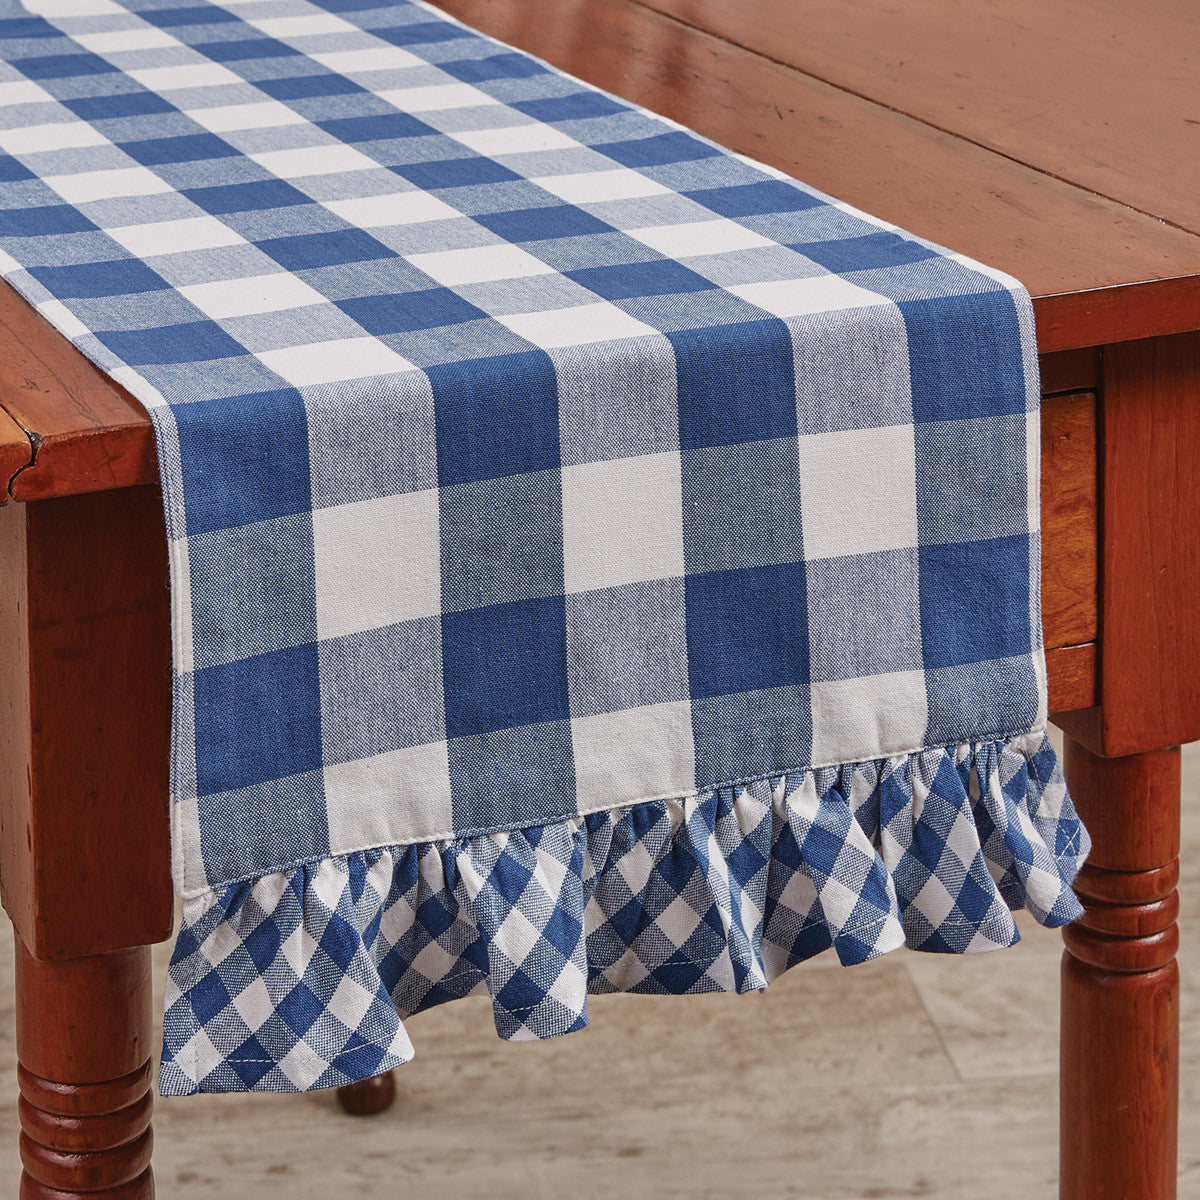 Wicklow Ruffled Table Runners - China Blue Park Designs